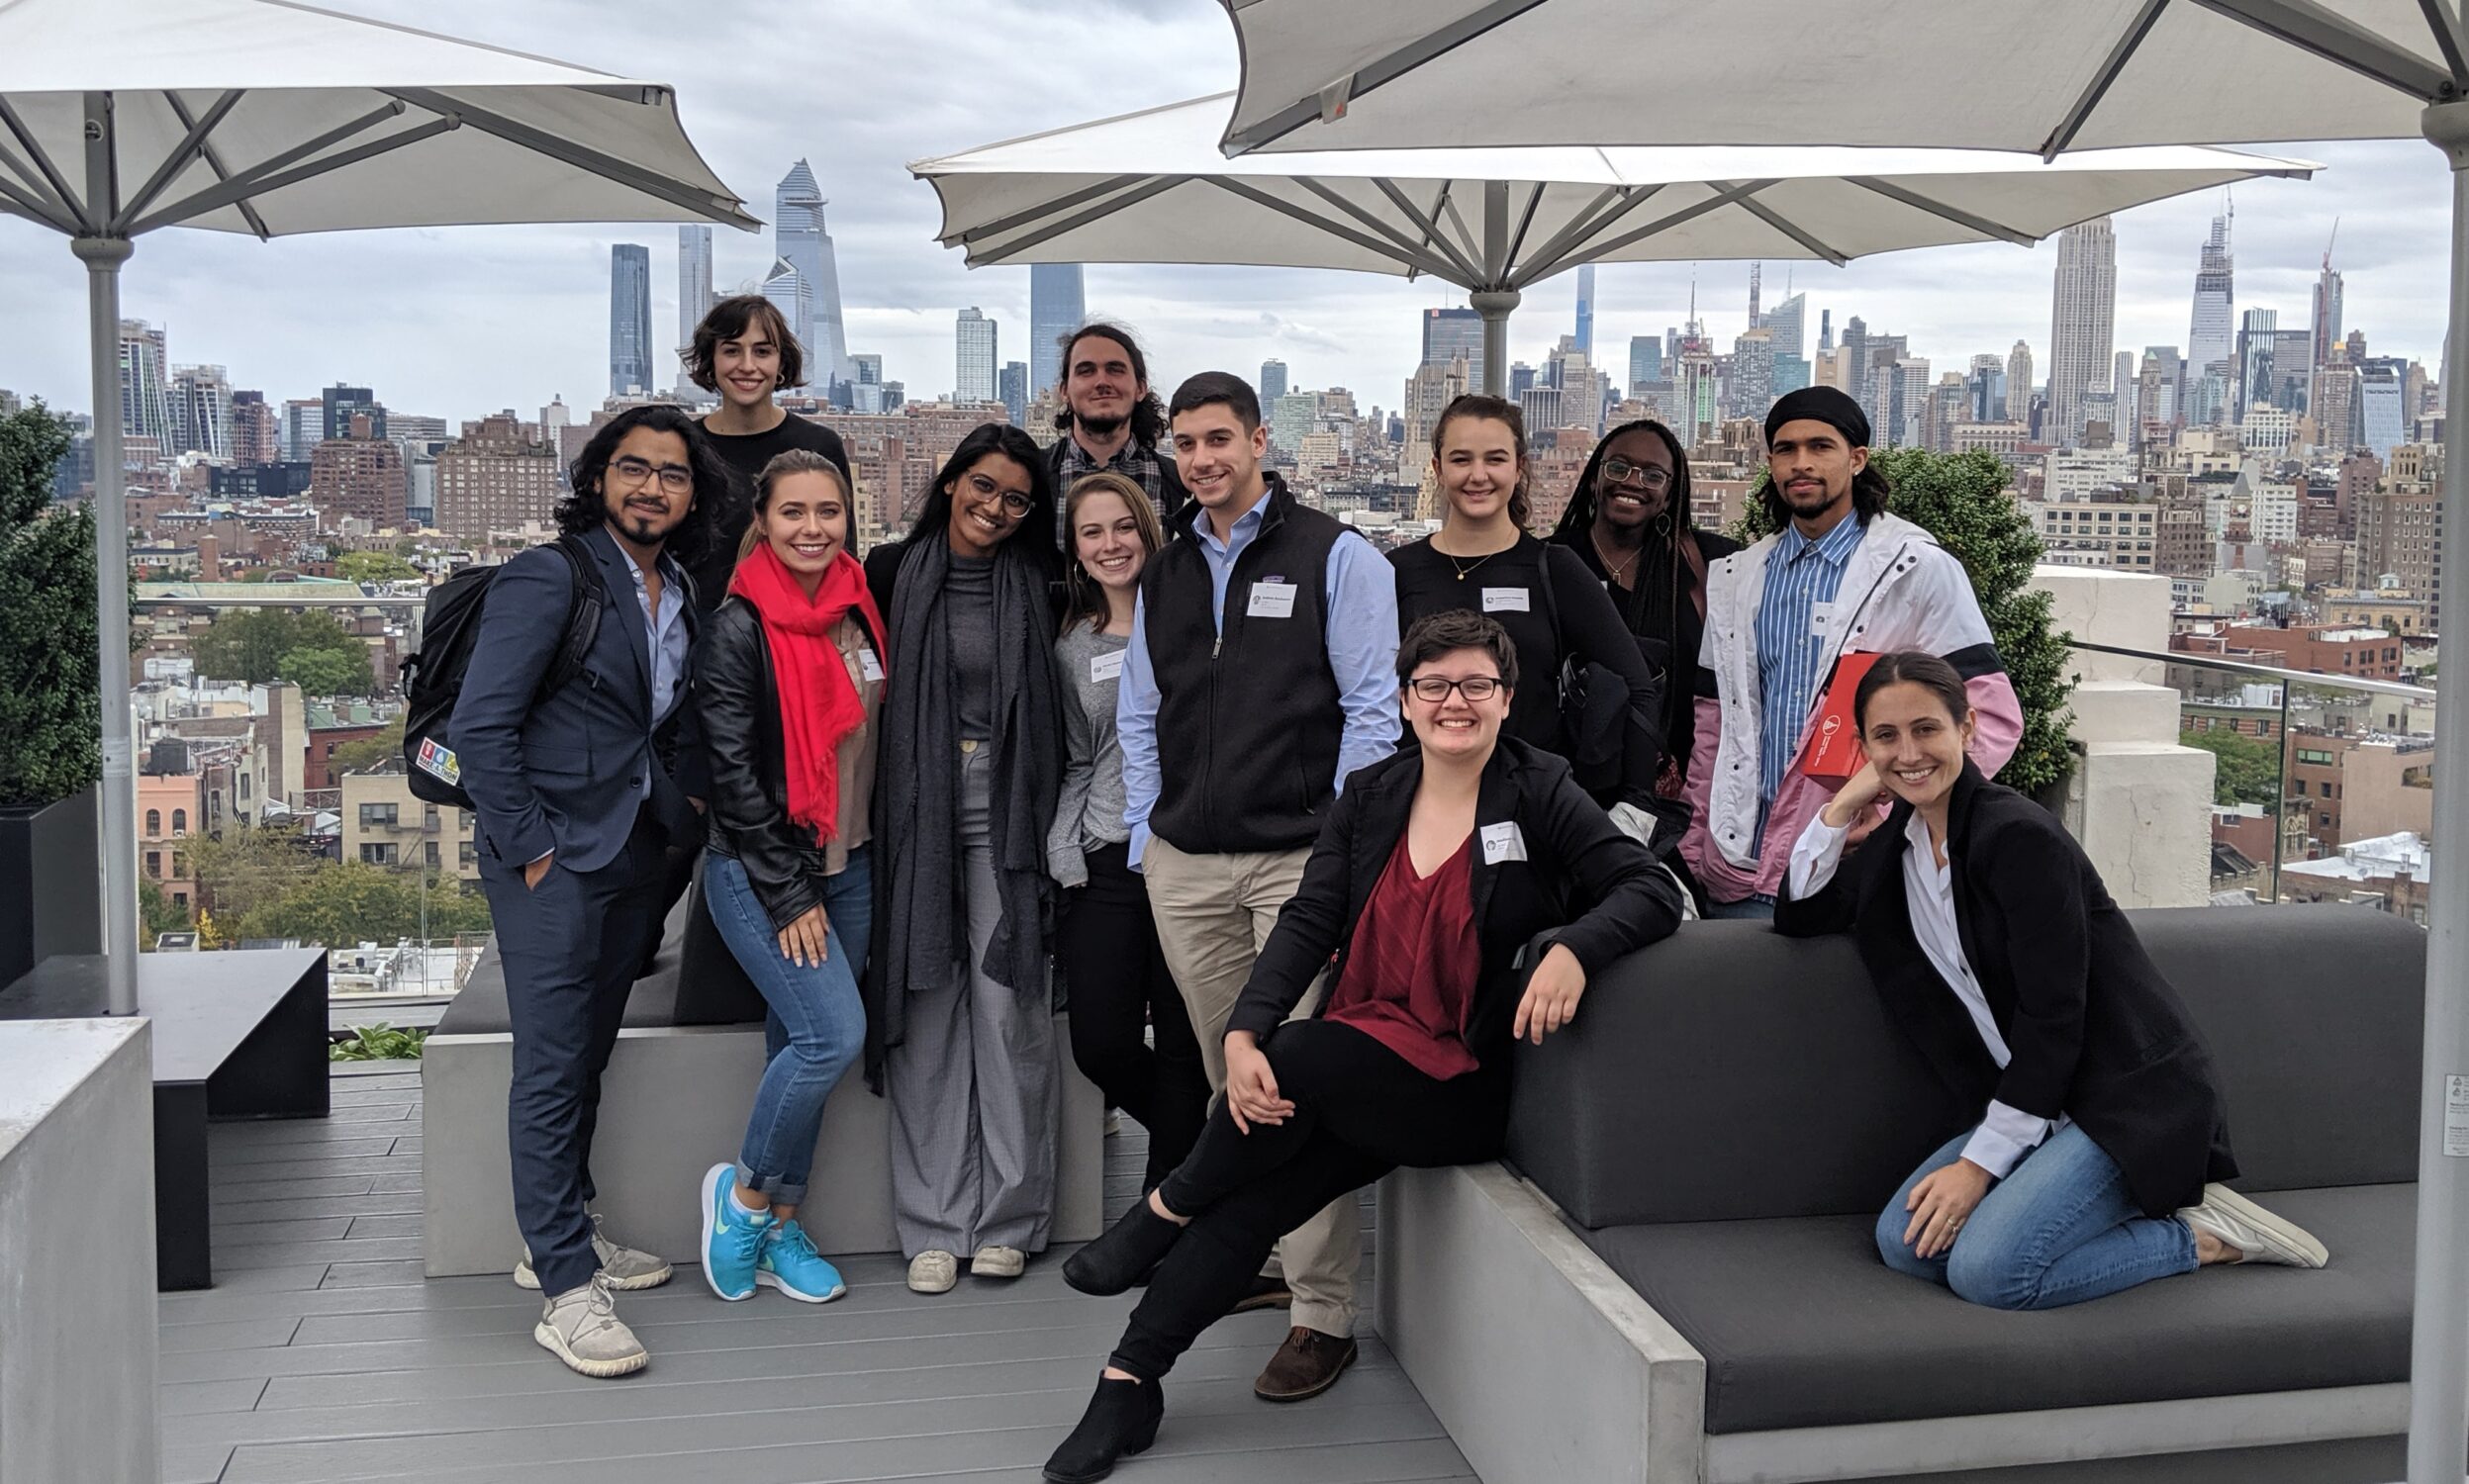 NC State Entrepreneurship students smiling on New York rooftop with city skyline in background while they visit New York for Fall break to visit startups and companies.